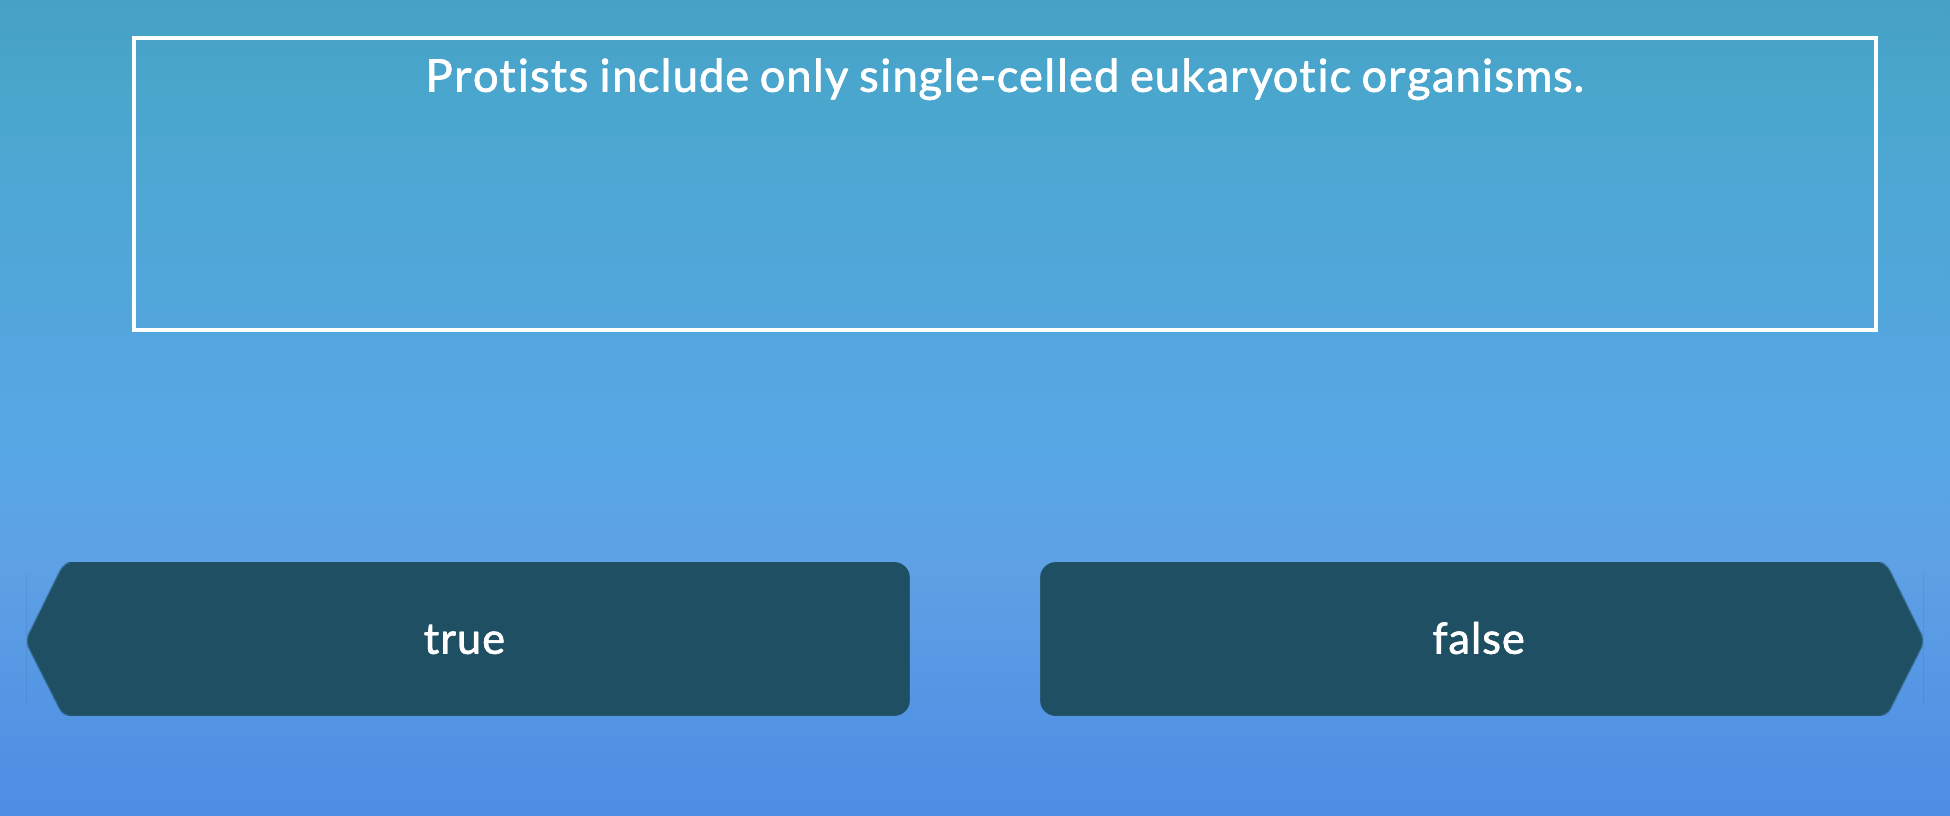 Protists include only single-celled eukaryotic organisms.
false
true
